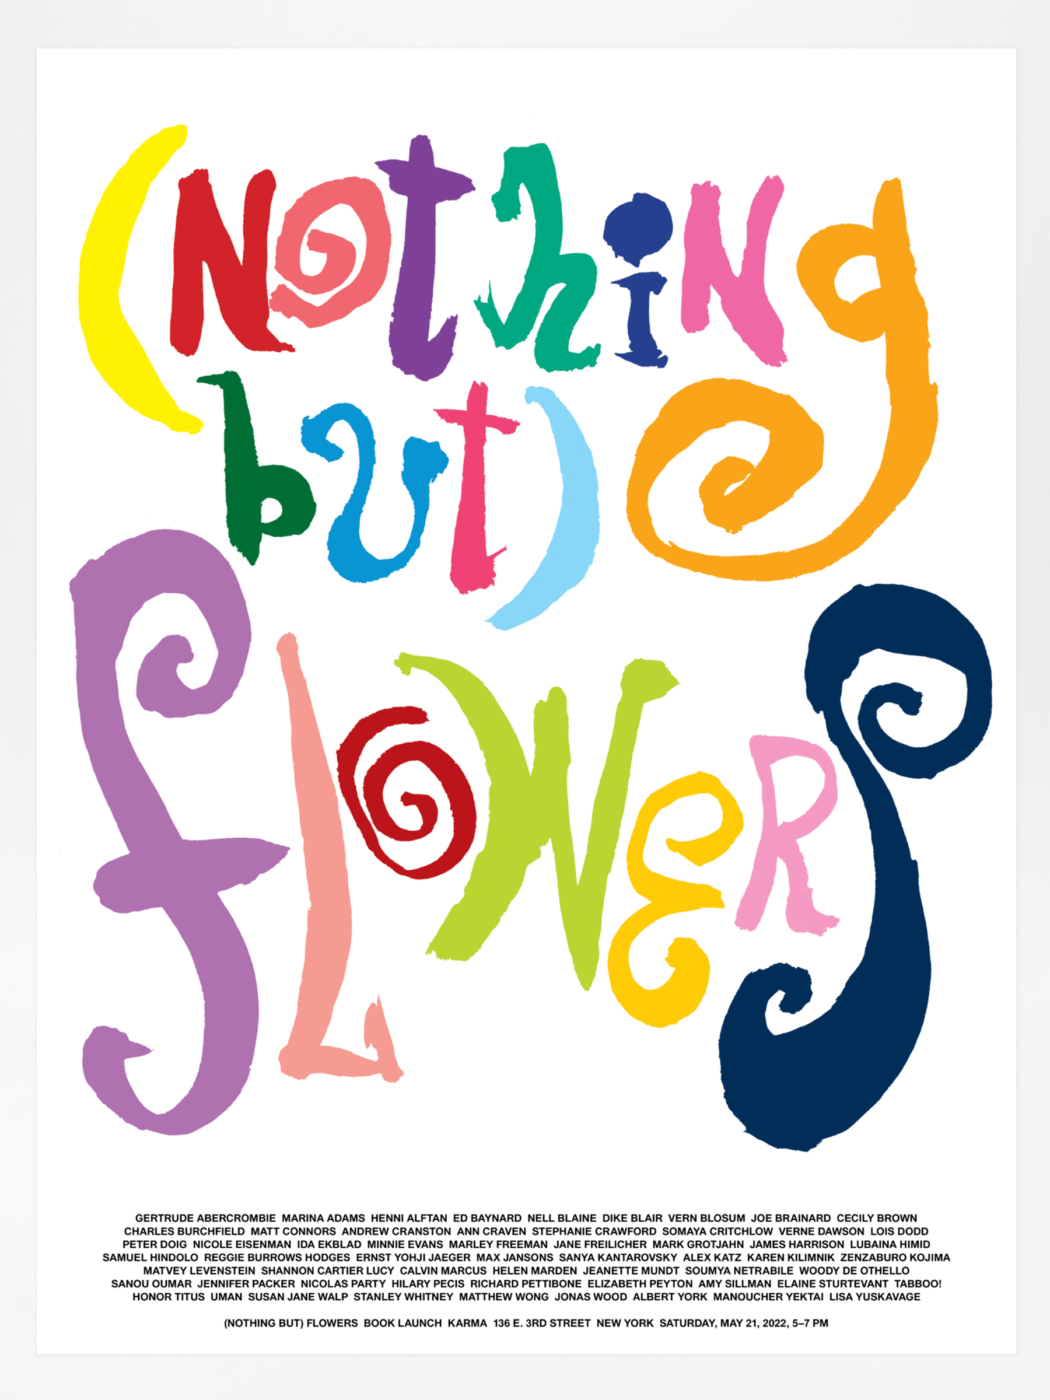 (Nothing but) Flowers book launch Poster